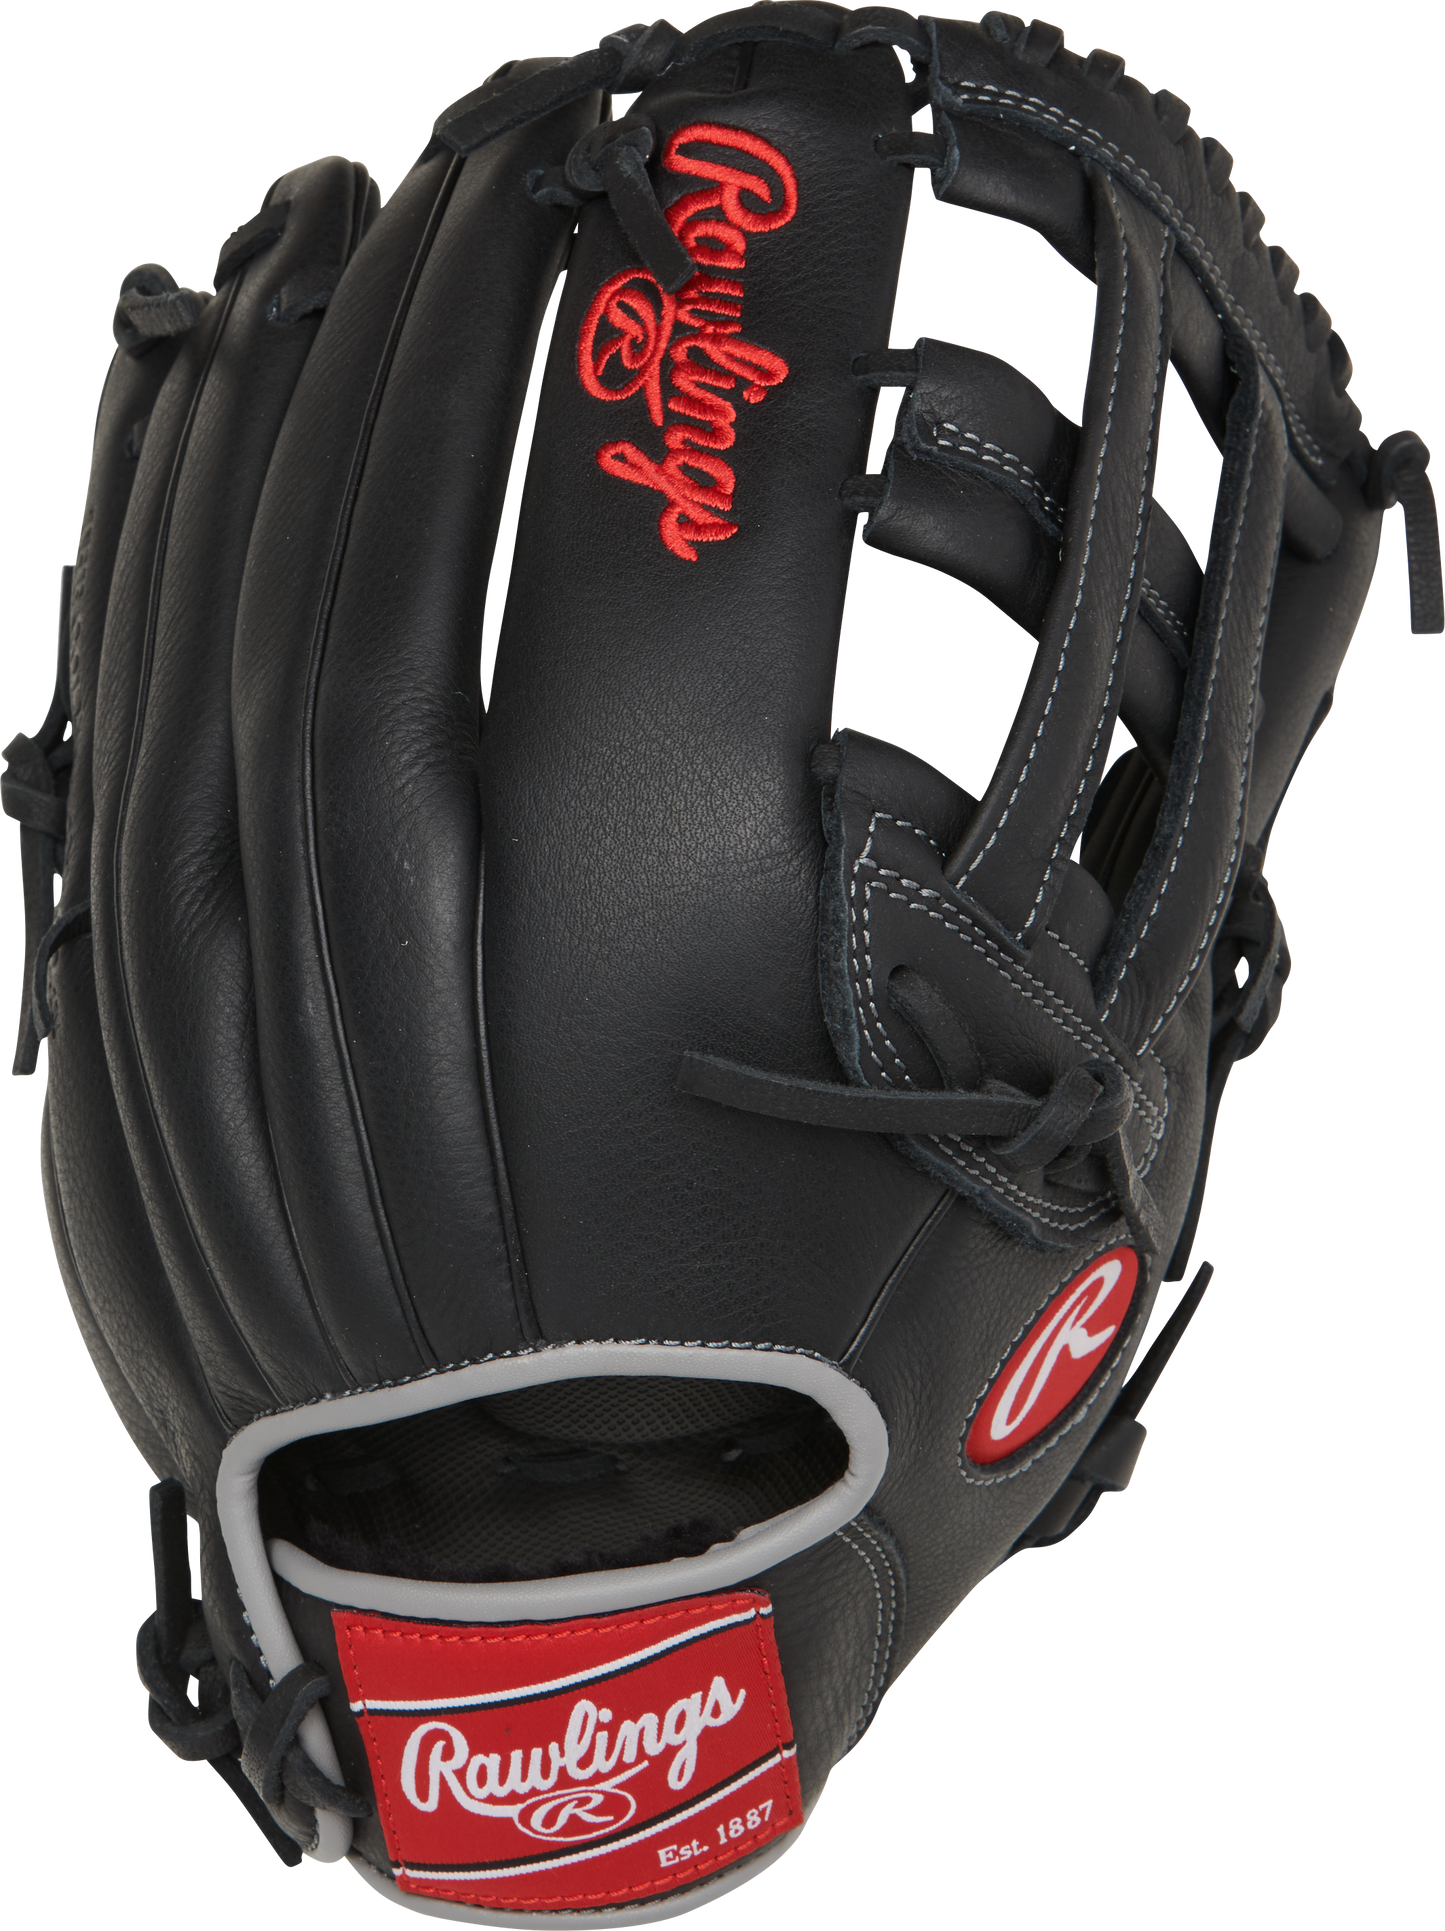 RAWLINGS AARON JUDGE 12 INCH YOUTH SELECT PRO LITE GLOVE